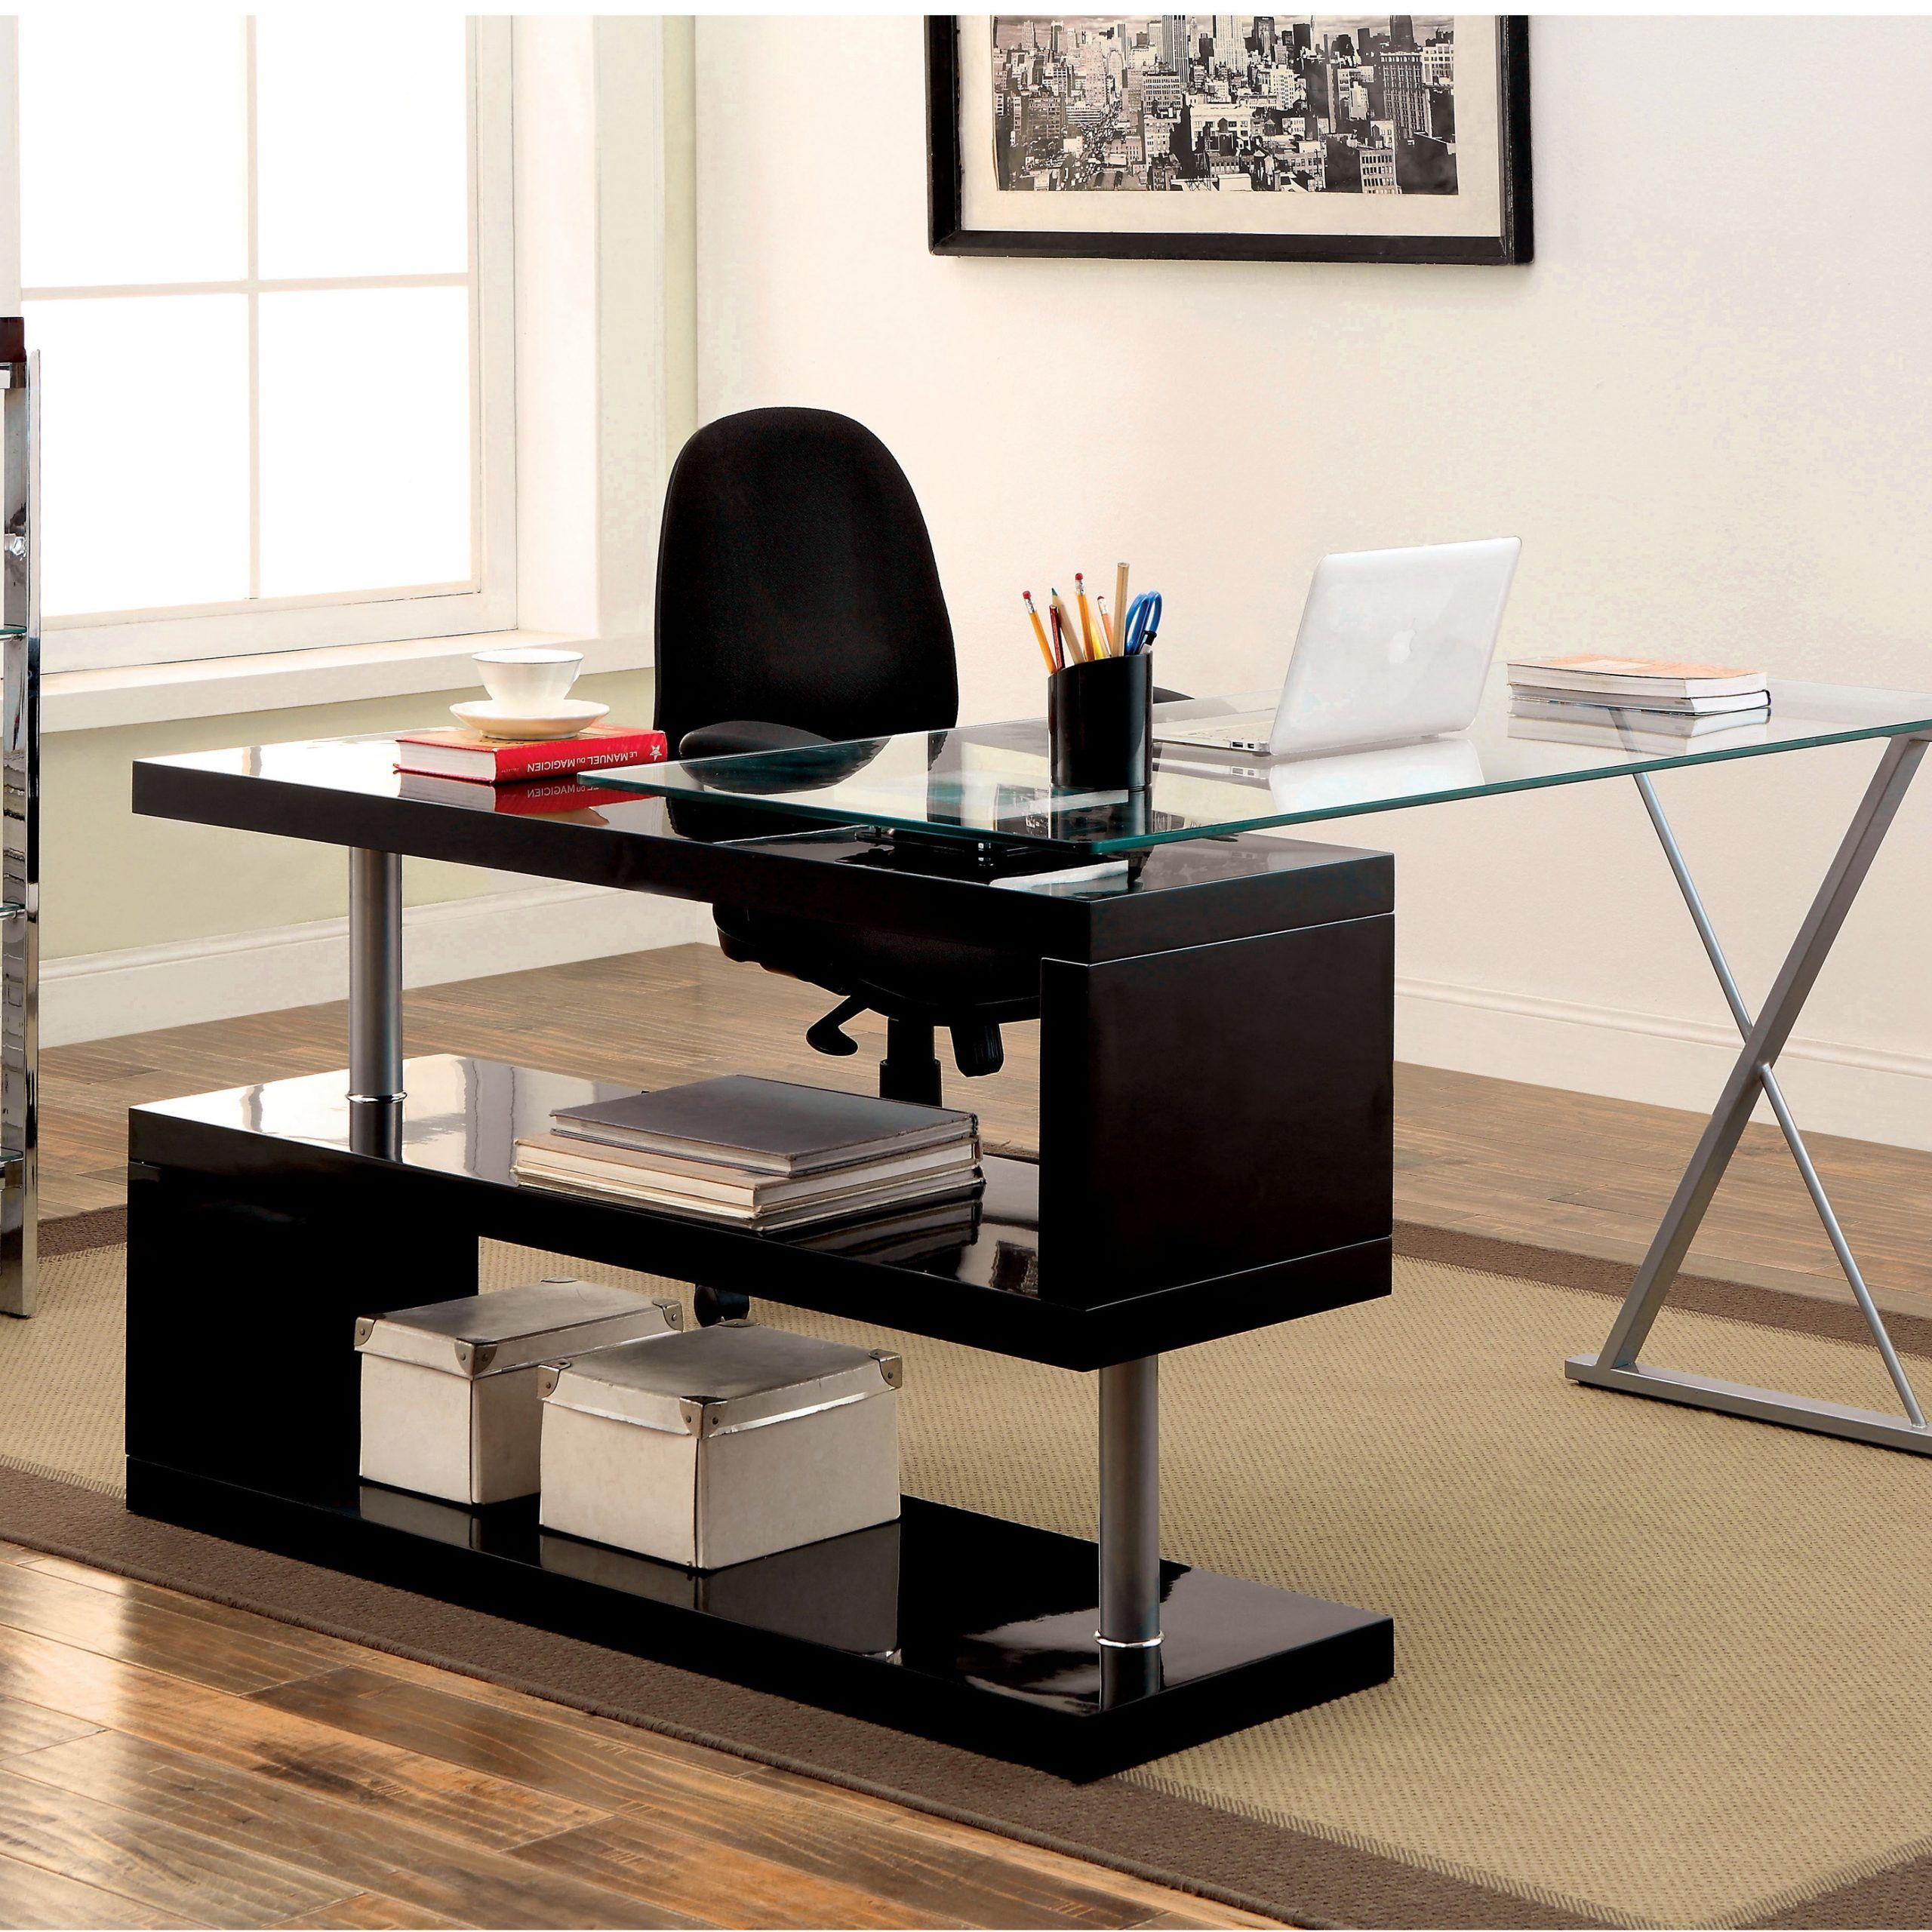 20+ Contemporary Office Desk Designs, Decorating Ideas | Design Trends Intended For Glass And Chrome Modern Computer Office Desks (View 11 of 15)